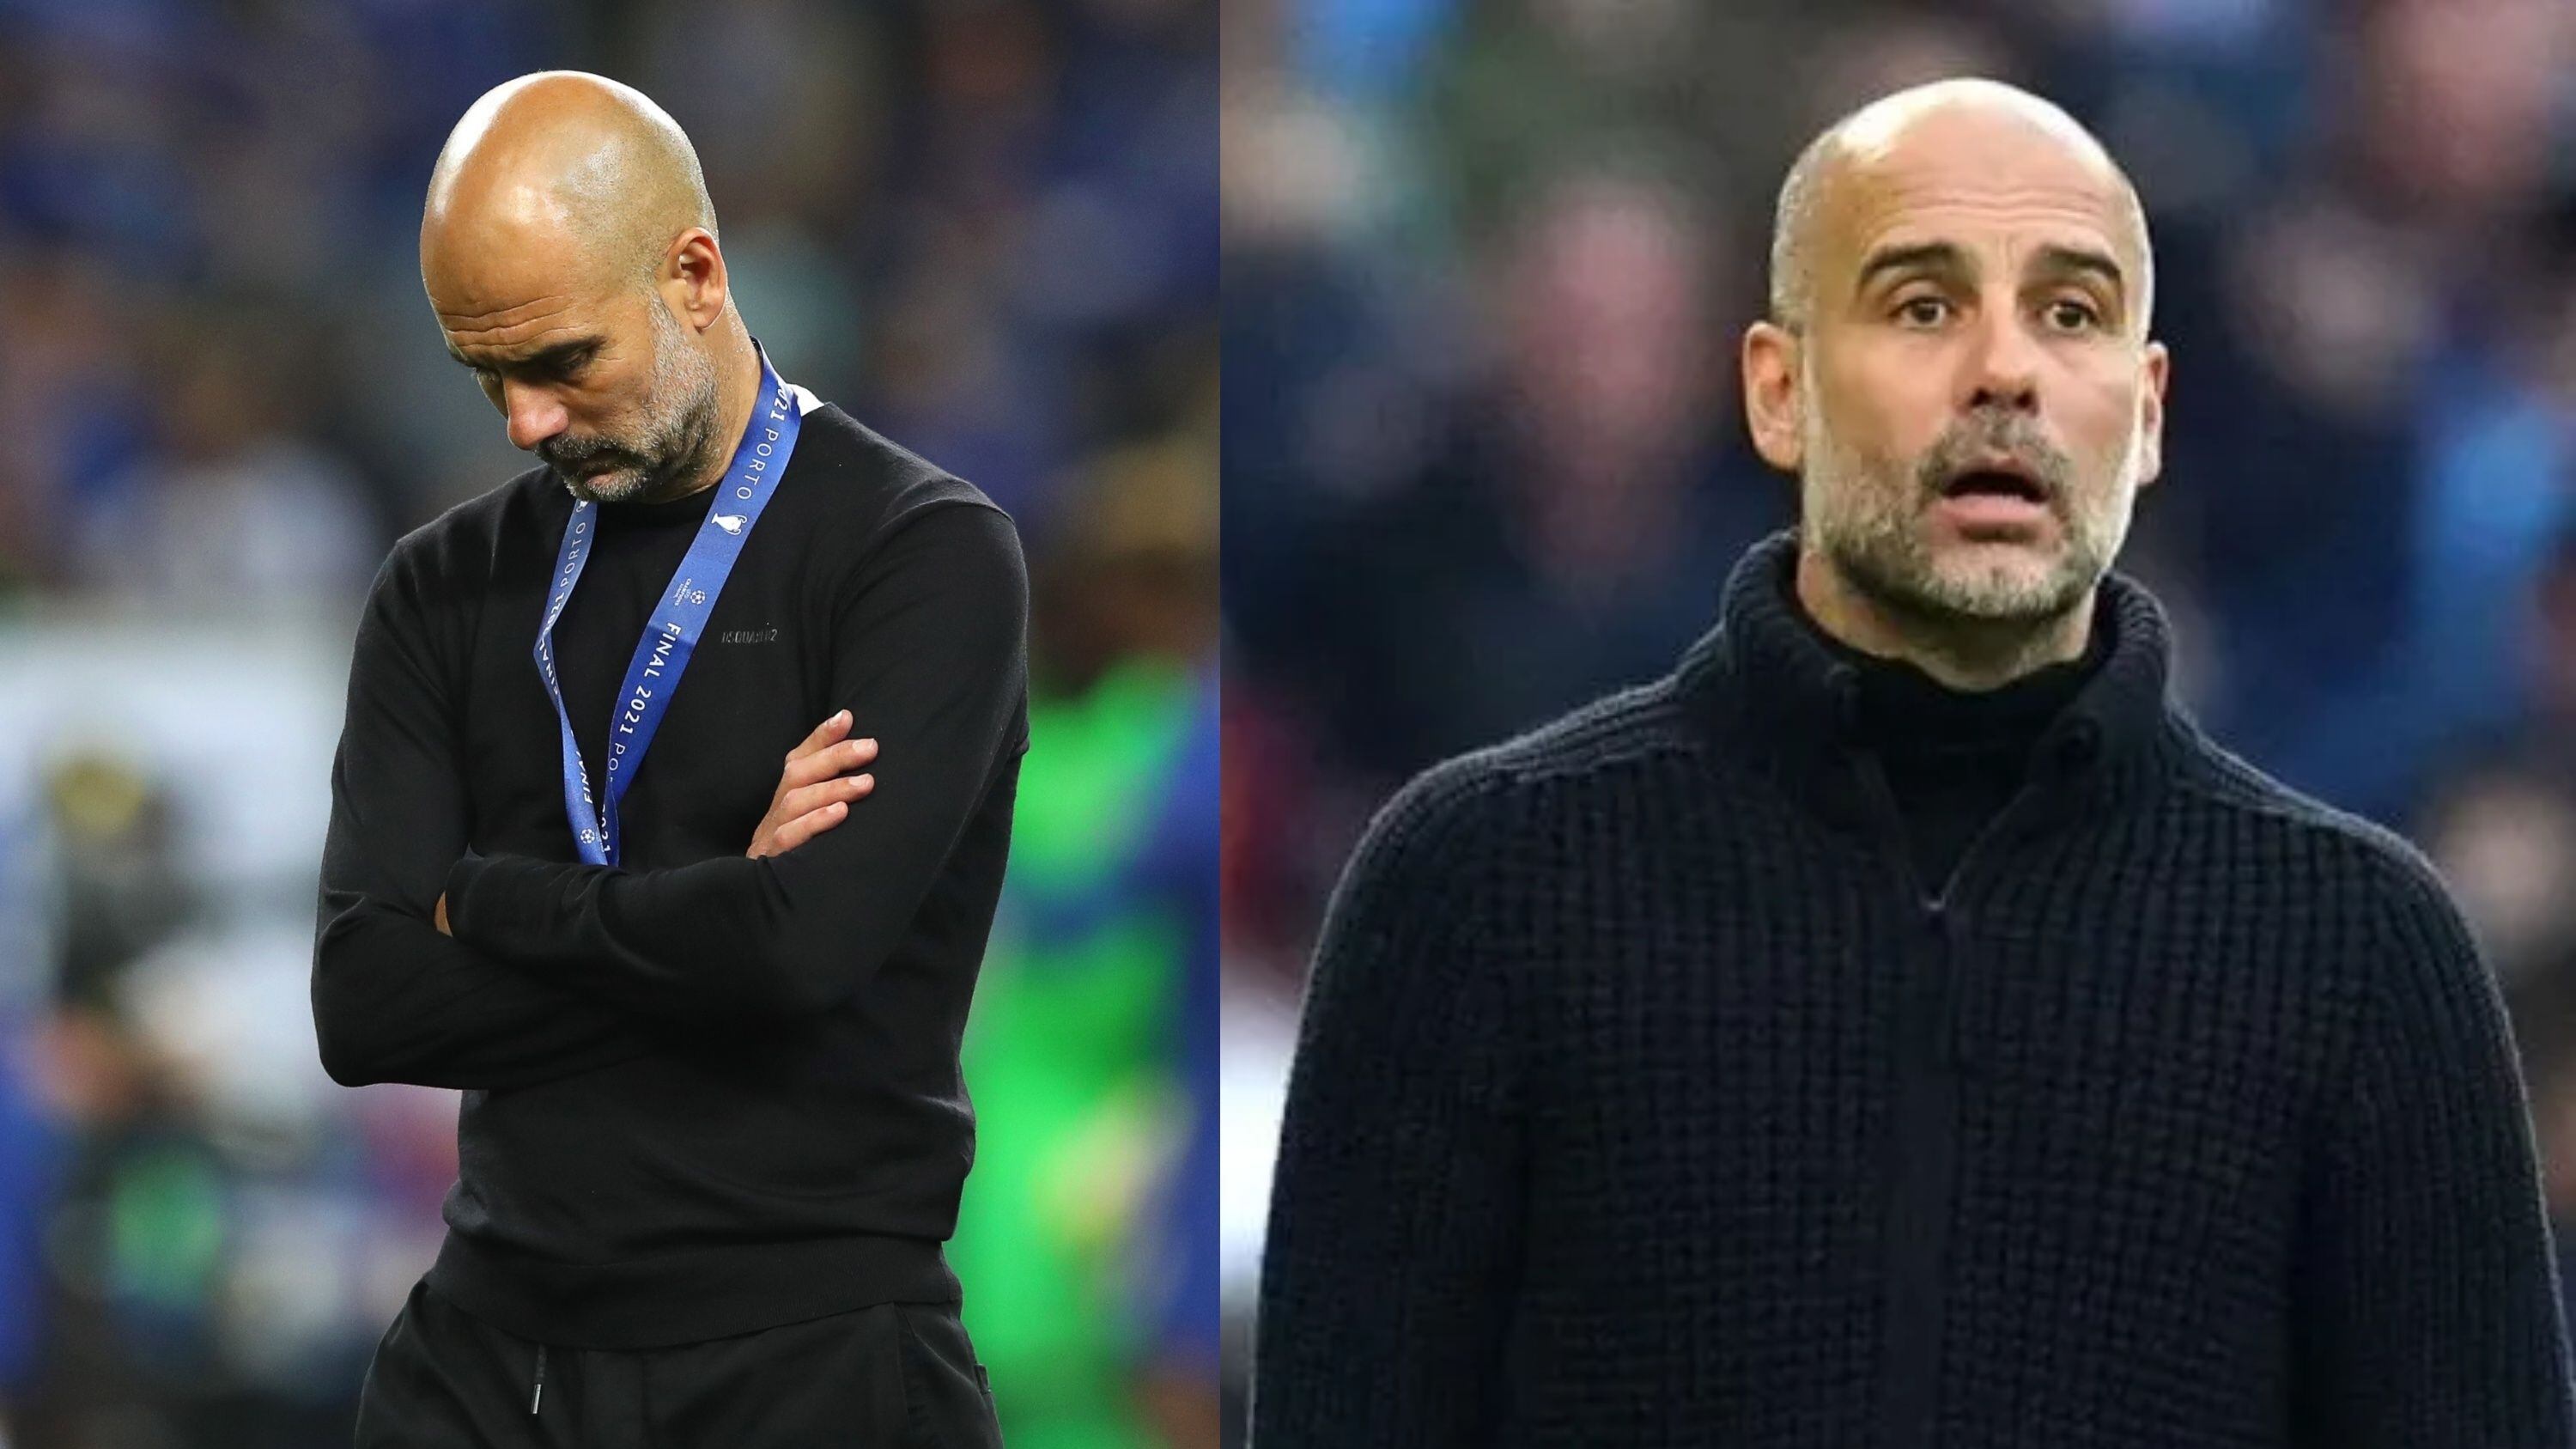 He is a Man City star, went to Ibiza and now Pep Guardiola will take him out of the club